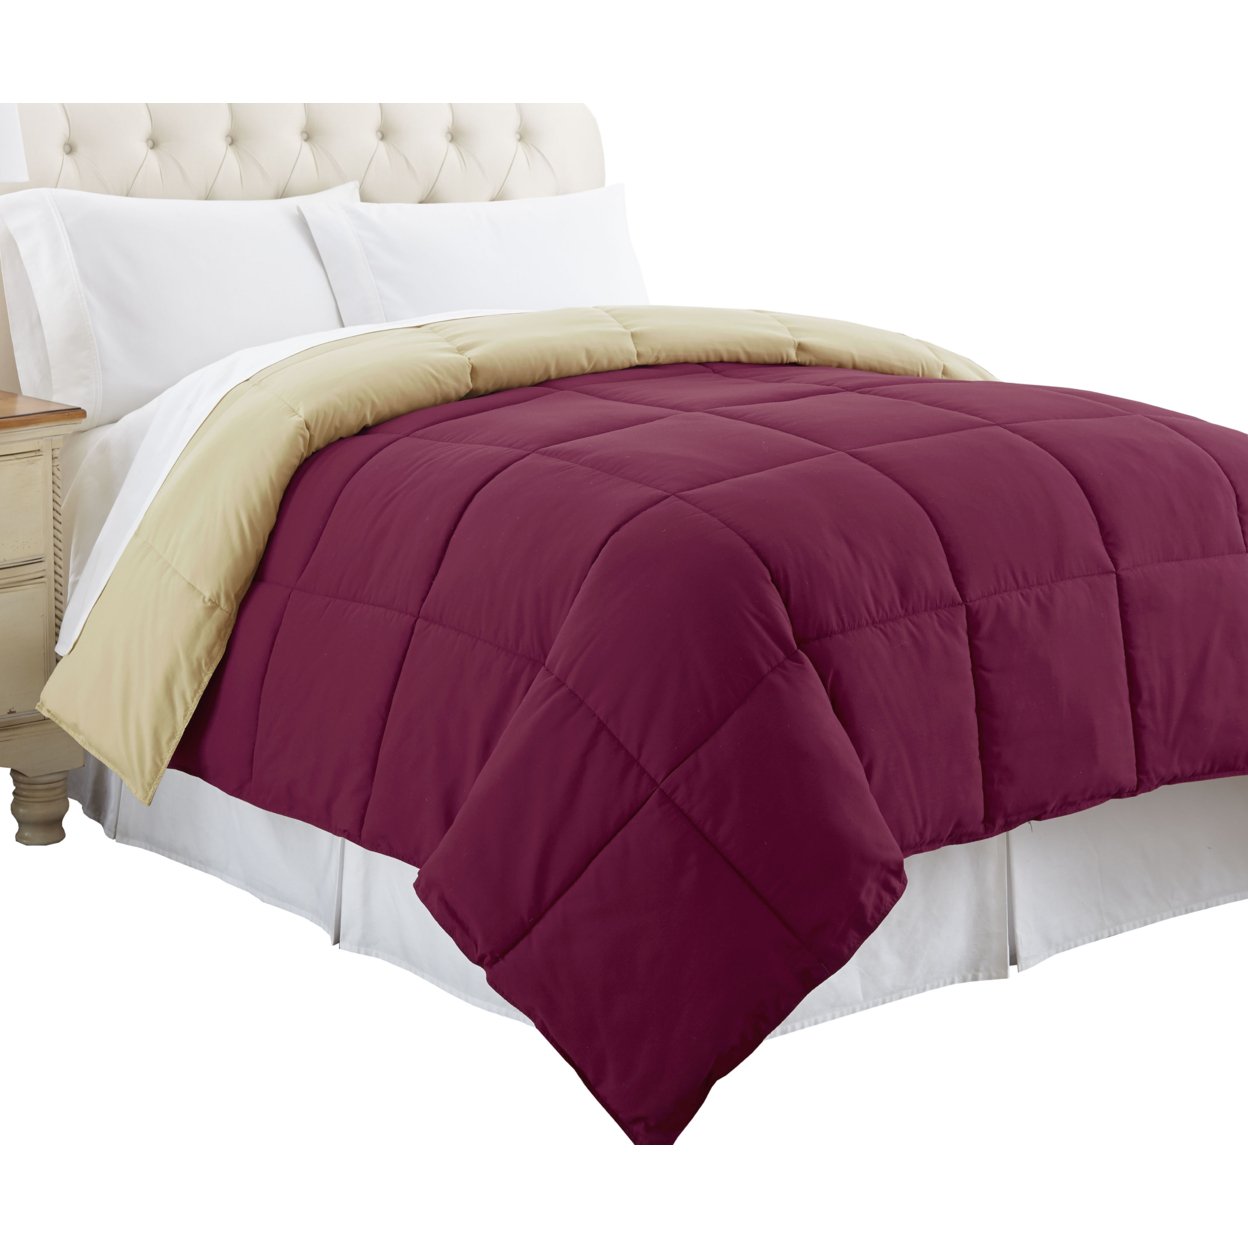 Genoa Twin Size Box Quilted Reversible Comforter The Urban Port, Pink And Beige- Saltoro Sherpi